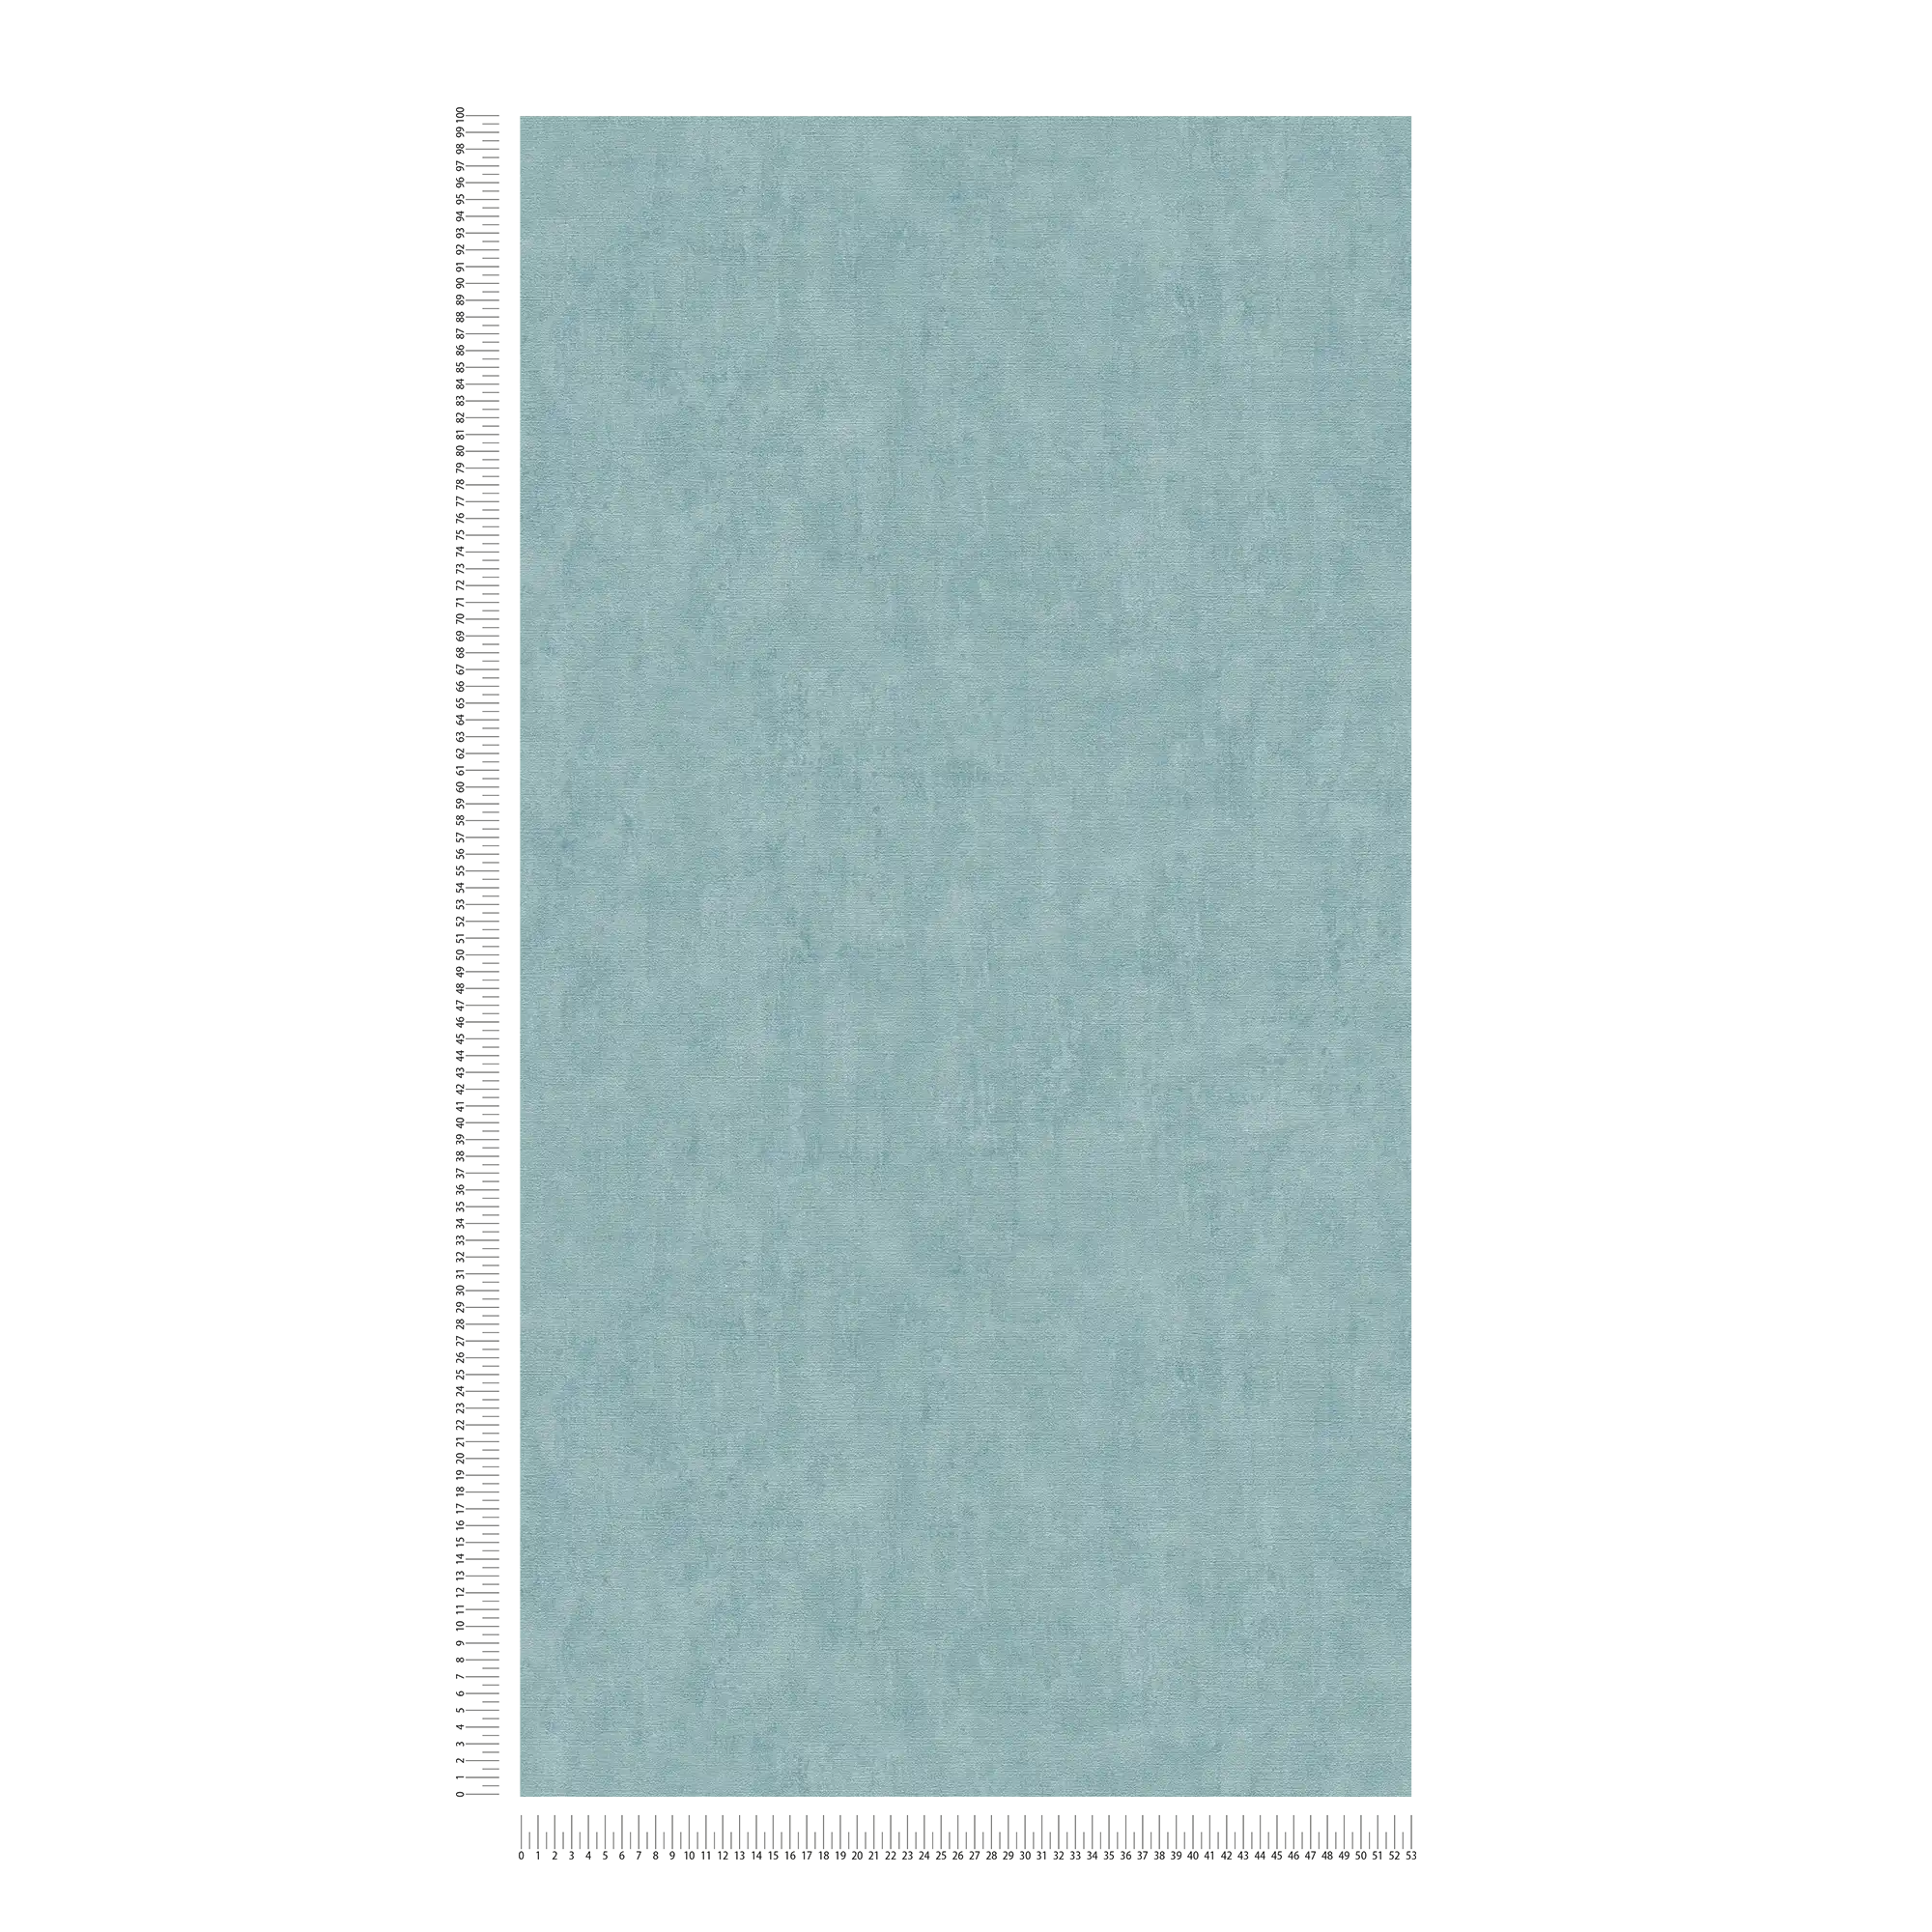             Wallpaper light blue colour hatching in vintage look - blue
        